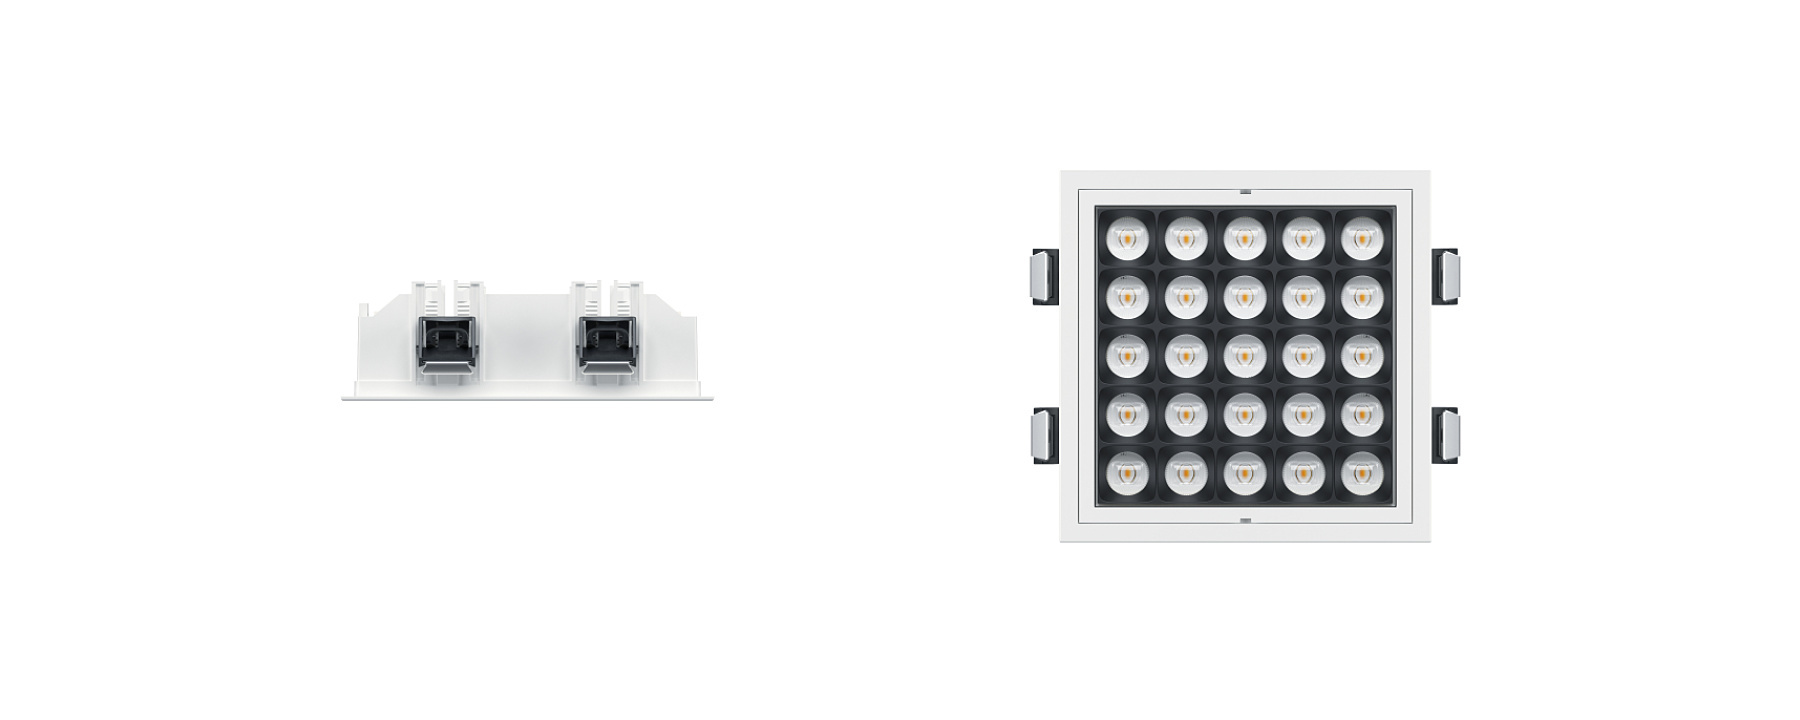 Jilly square - Recessed luminaires